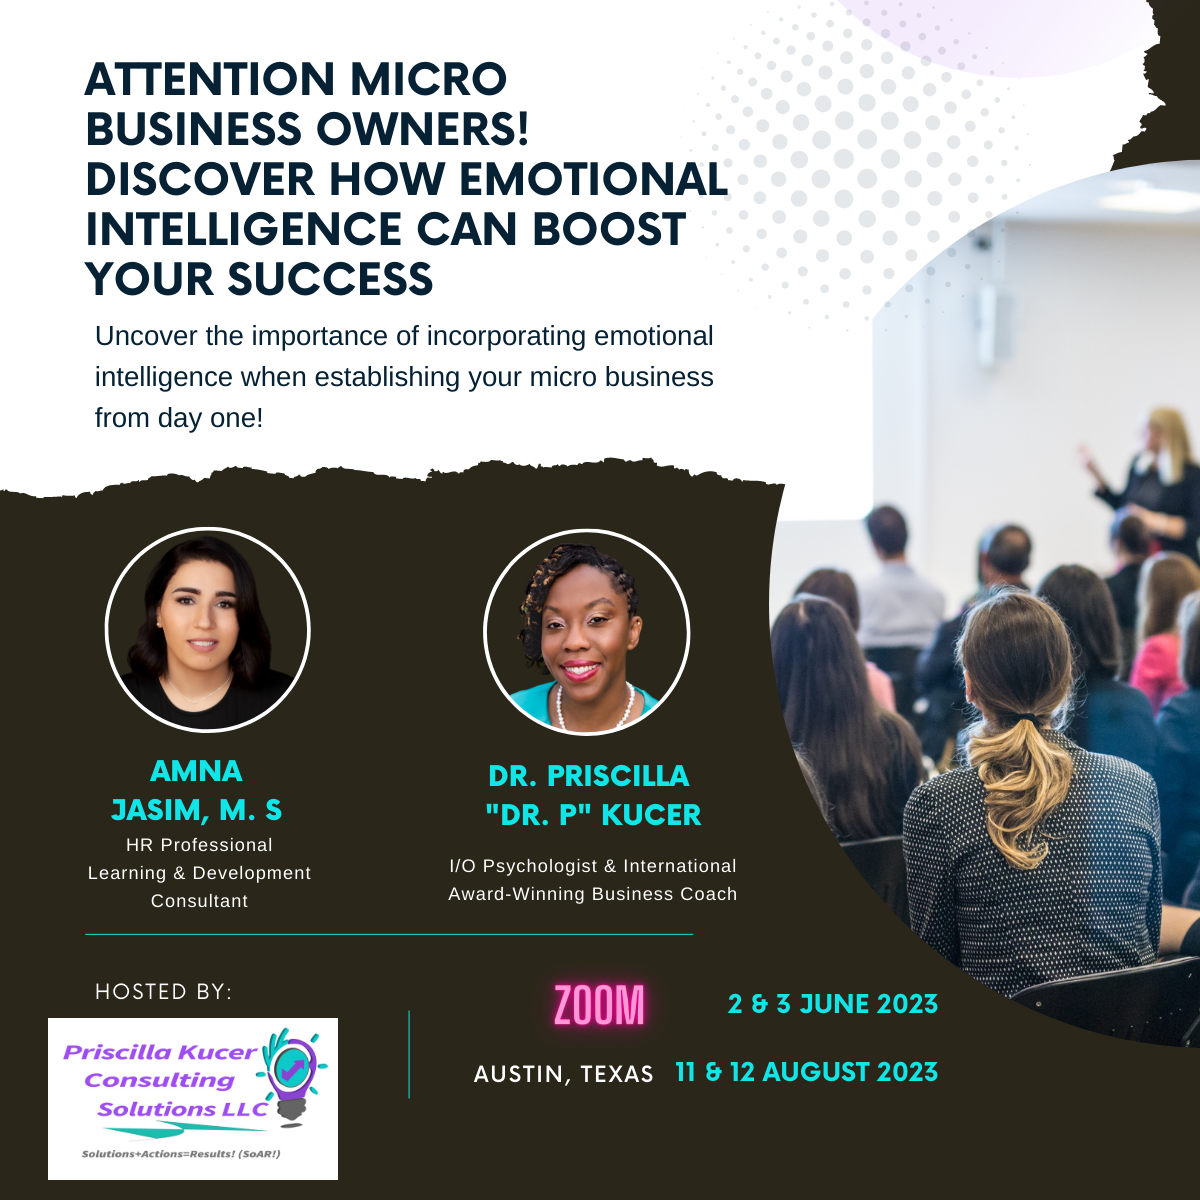 Discover How Emotional Intelligence Can Boost Your Business